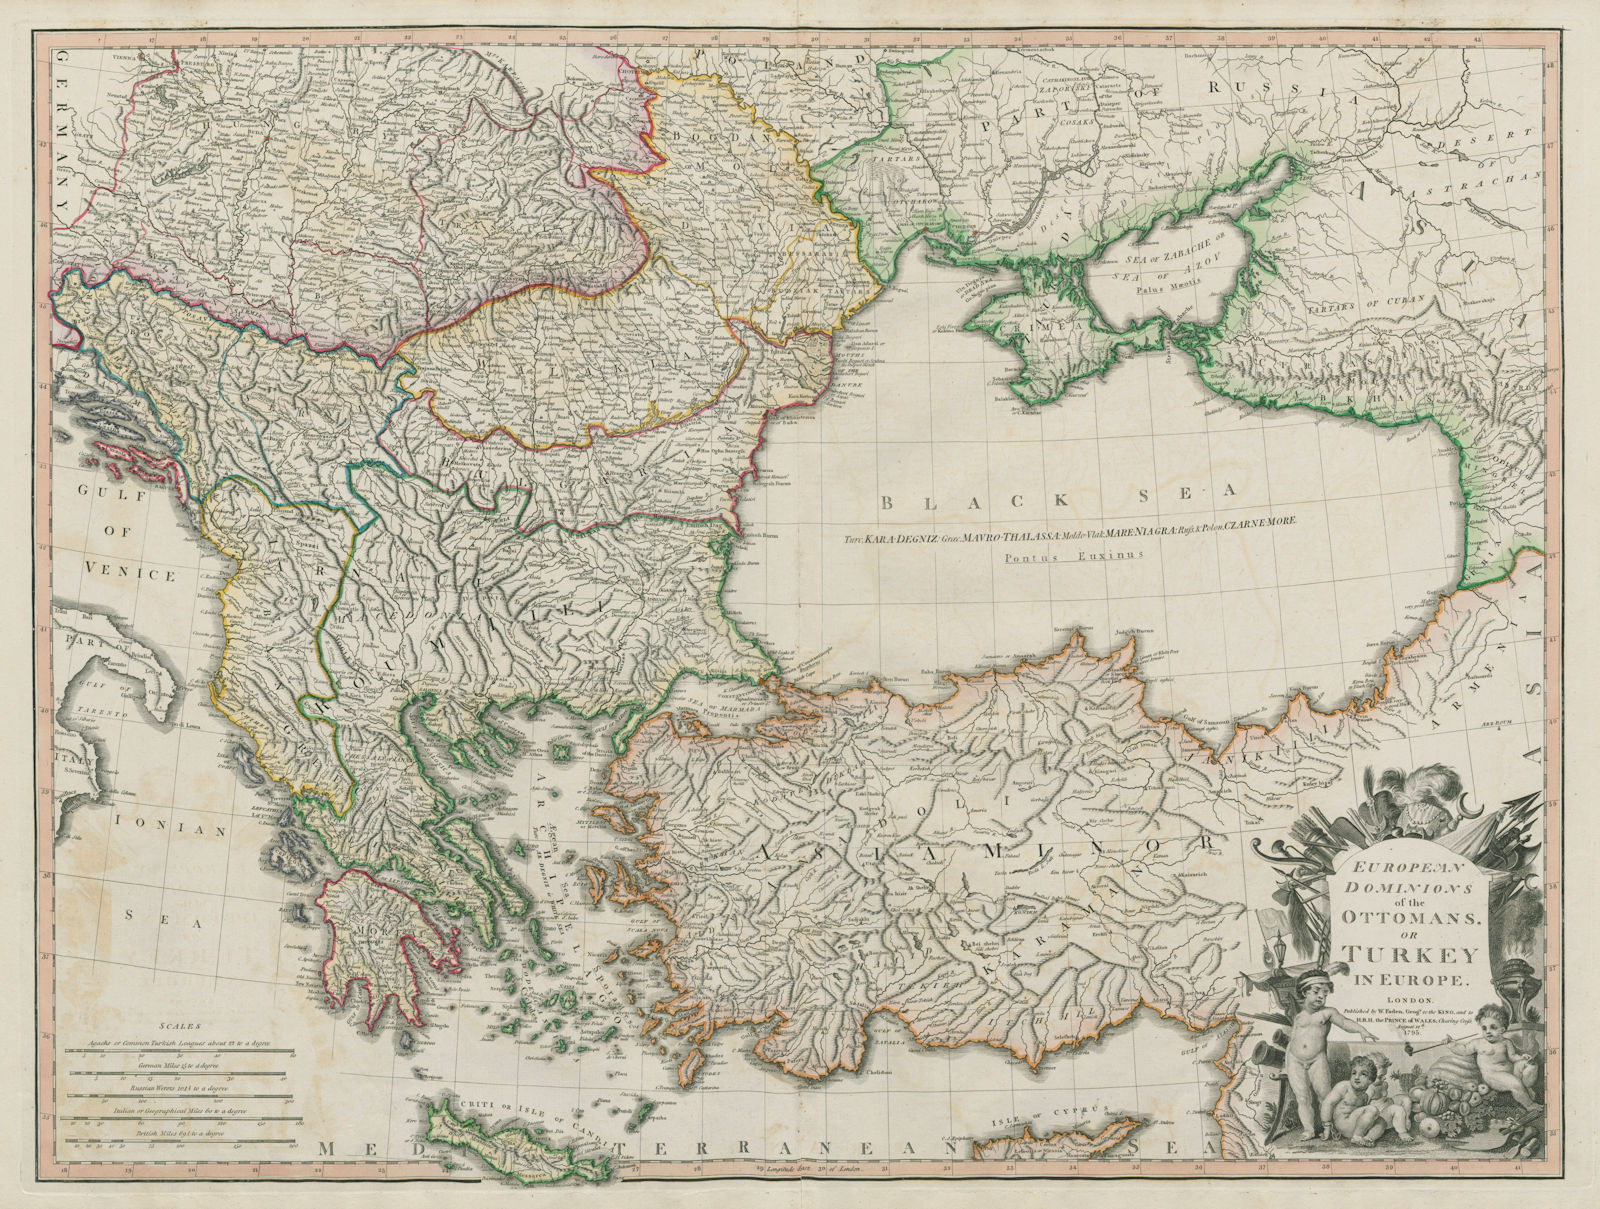 European Dominions of the Ottomans or Turkey in Europe. Balkans. FADEN 1795 map